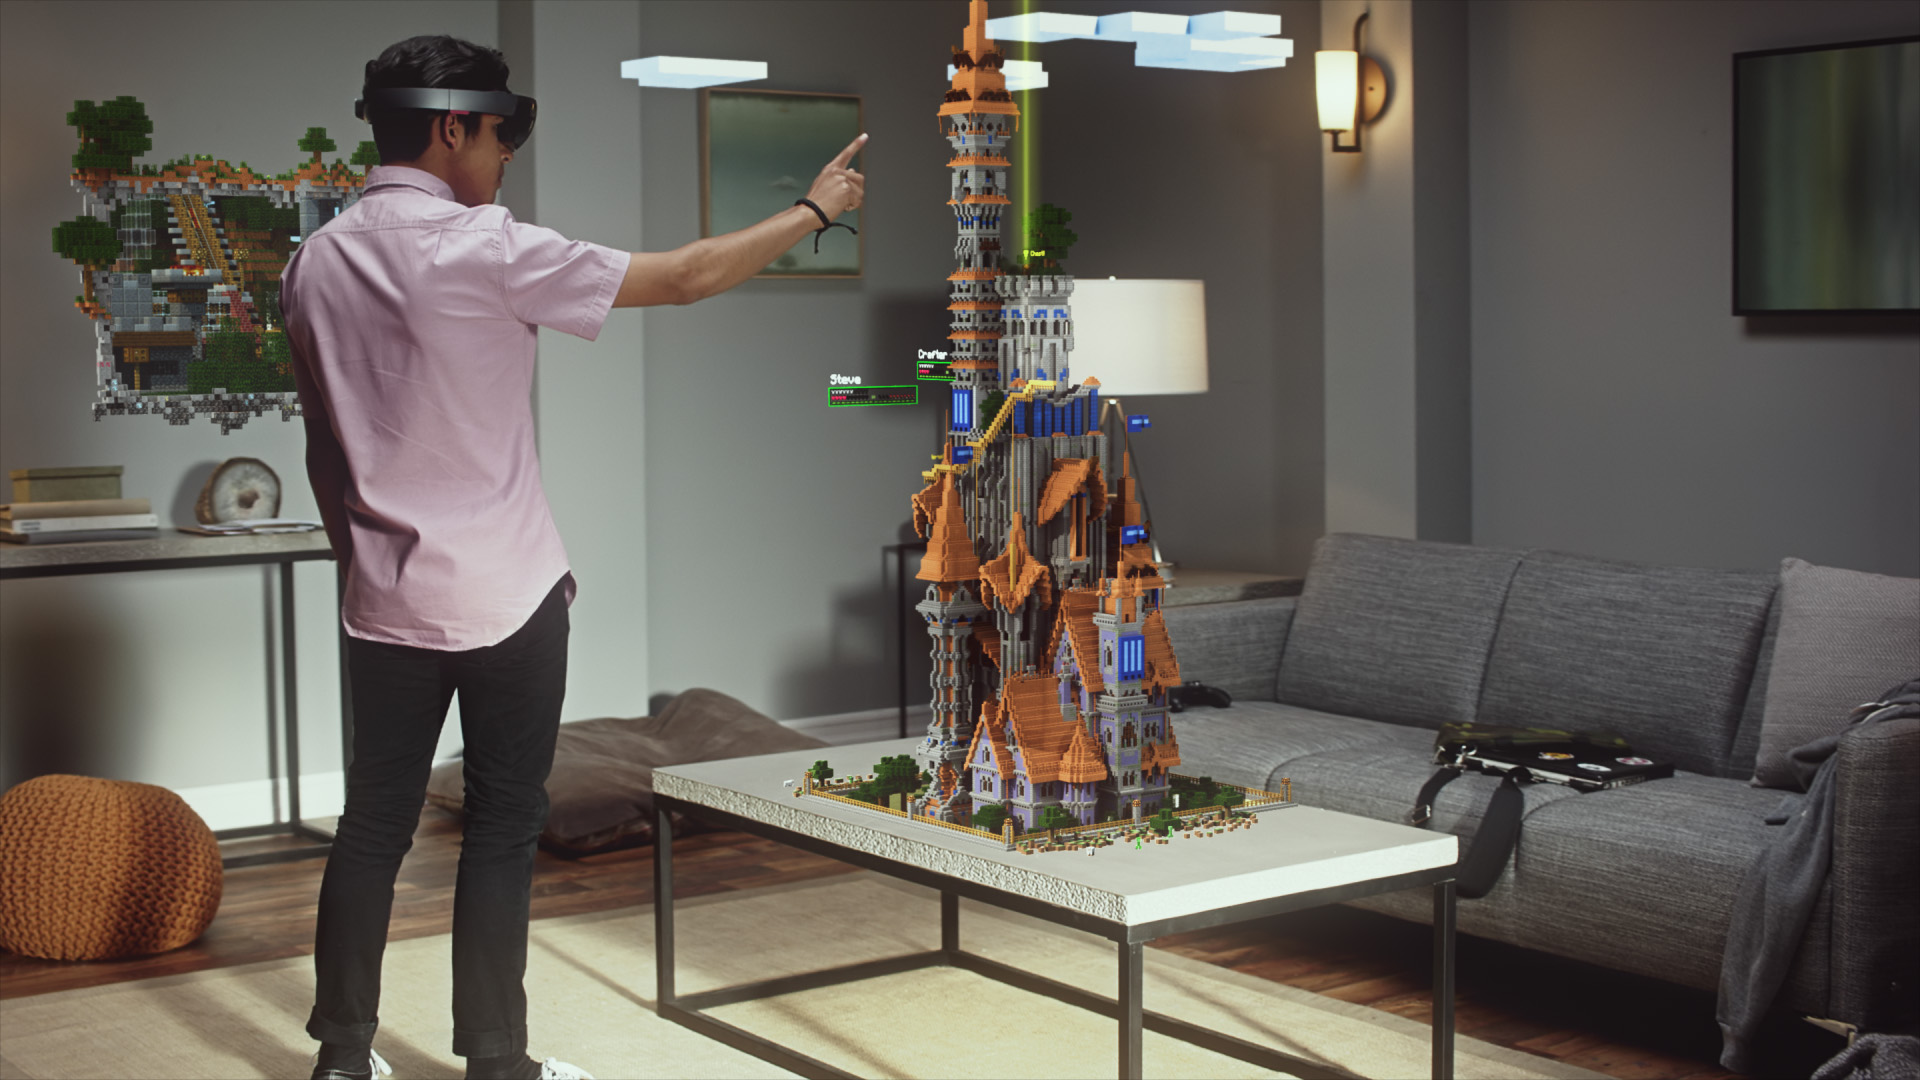 I Played Minecraft With Microsoft’s HoloLens, And It Was Pretty Awesome